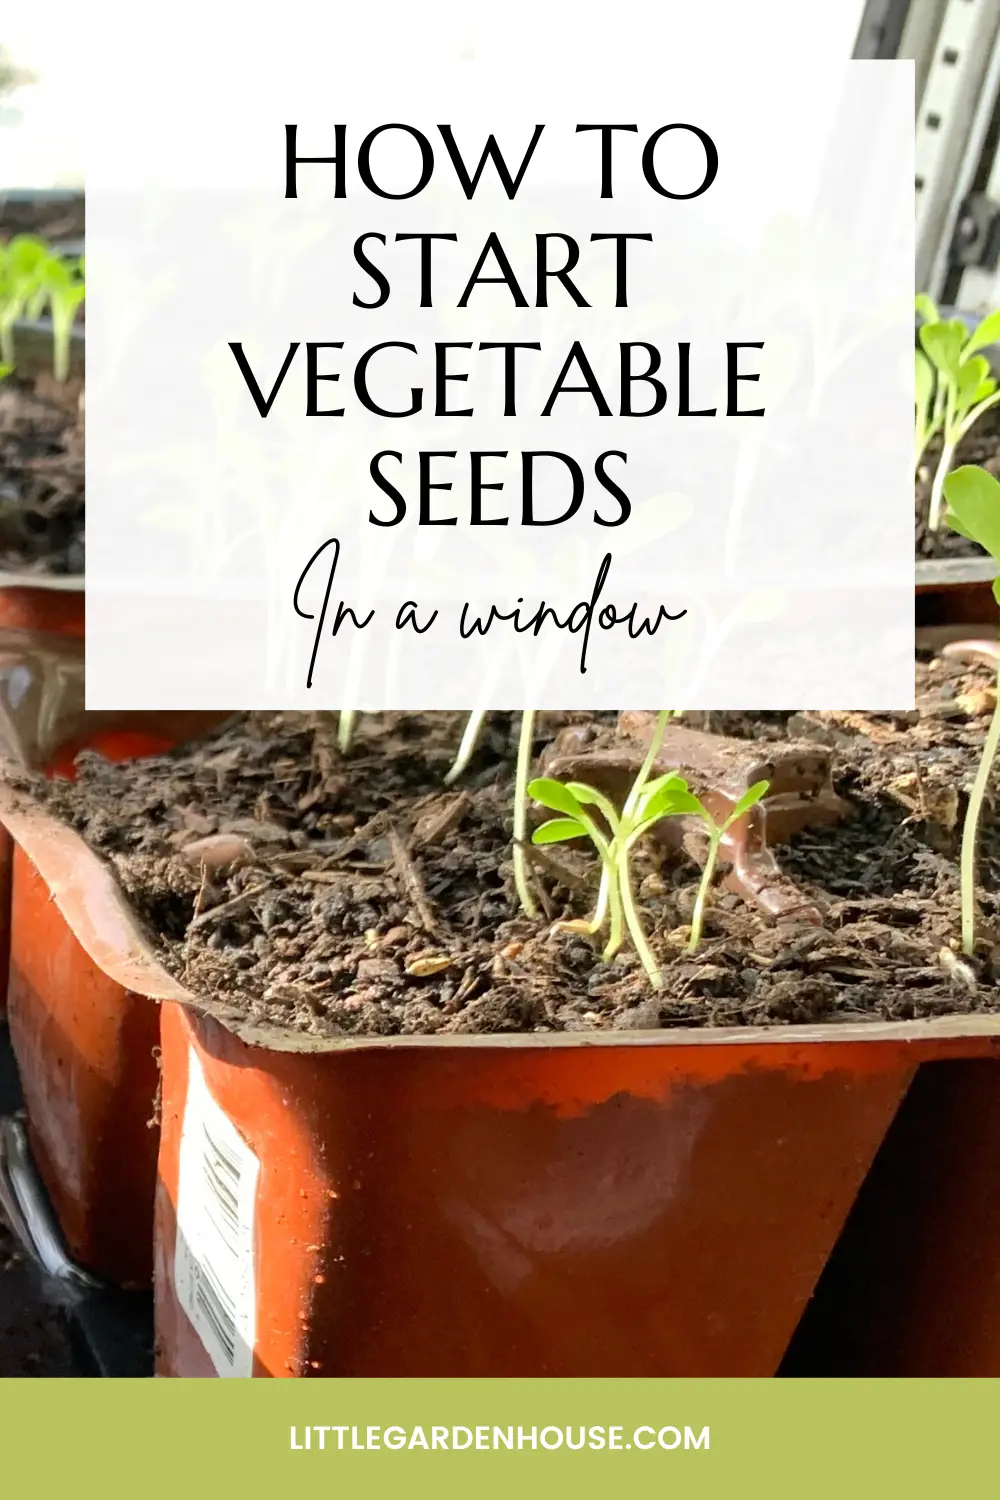 How to Start Vegetable Seeds in a Window